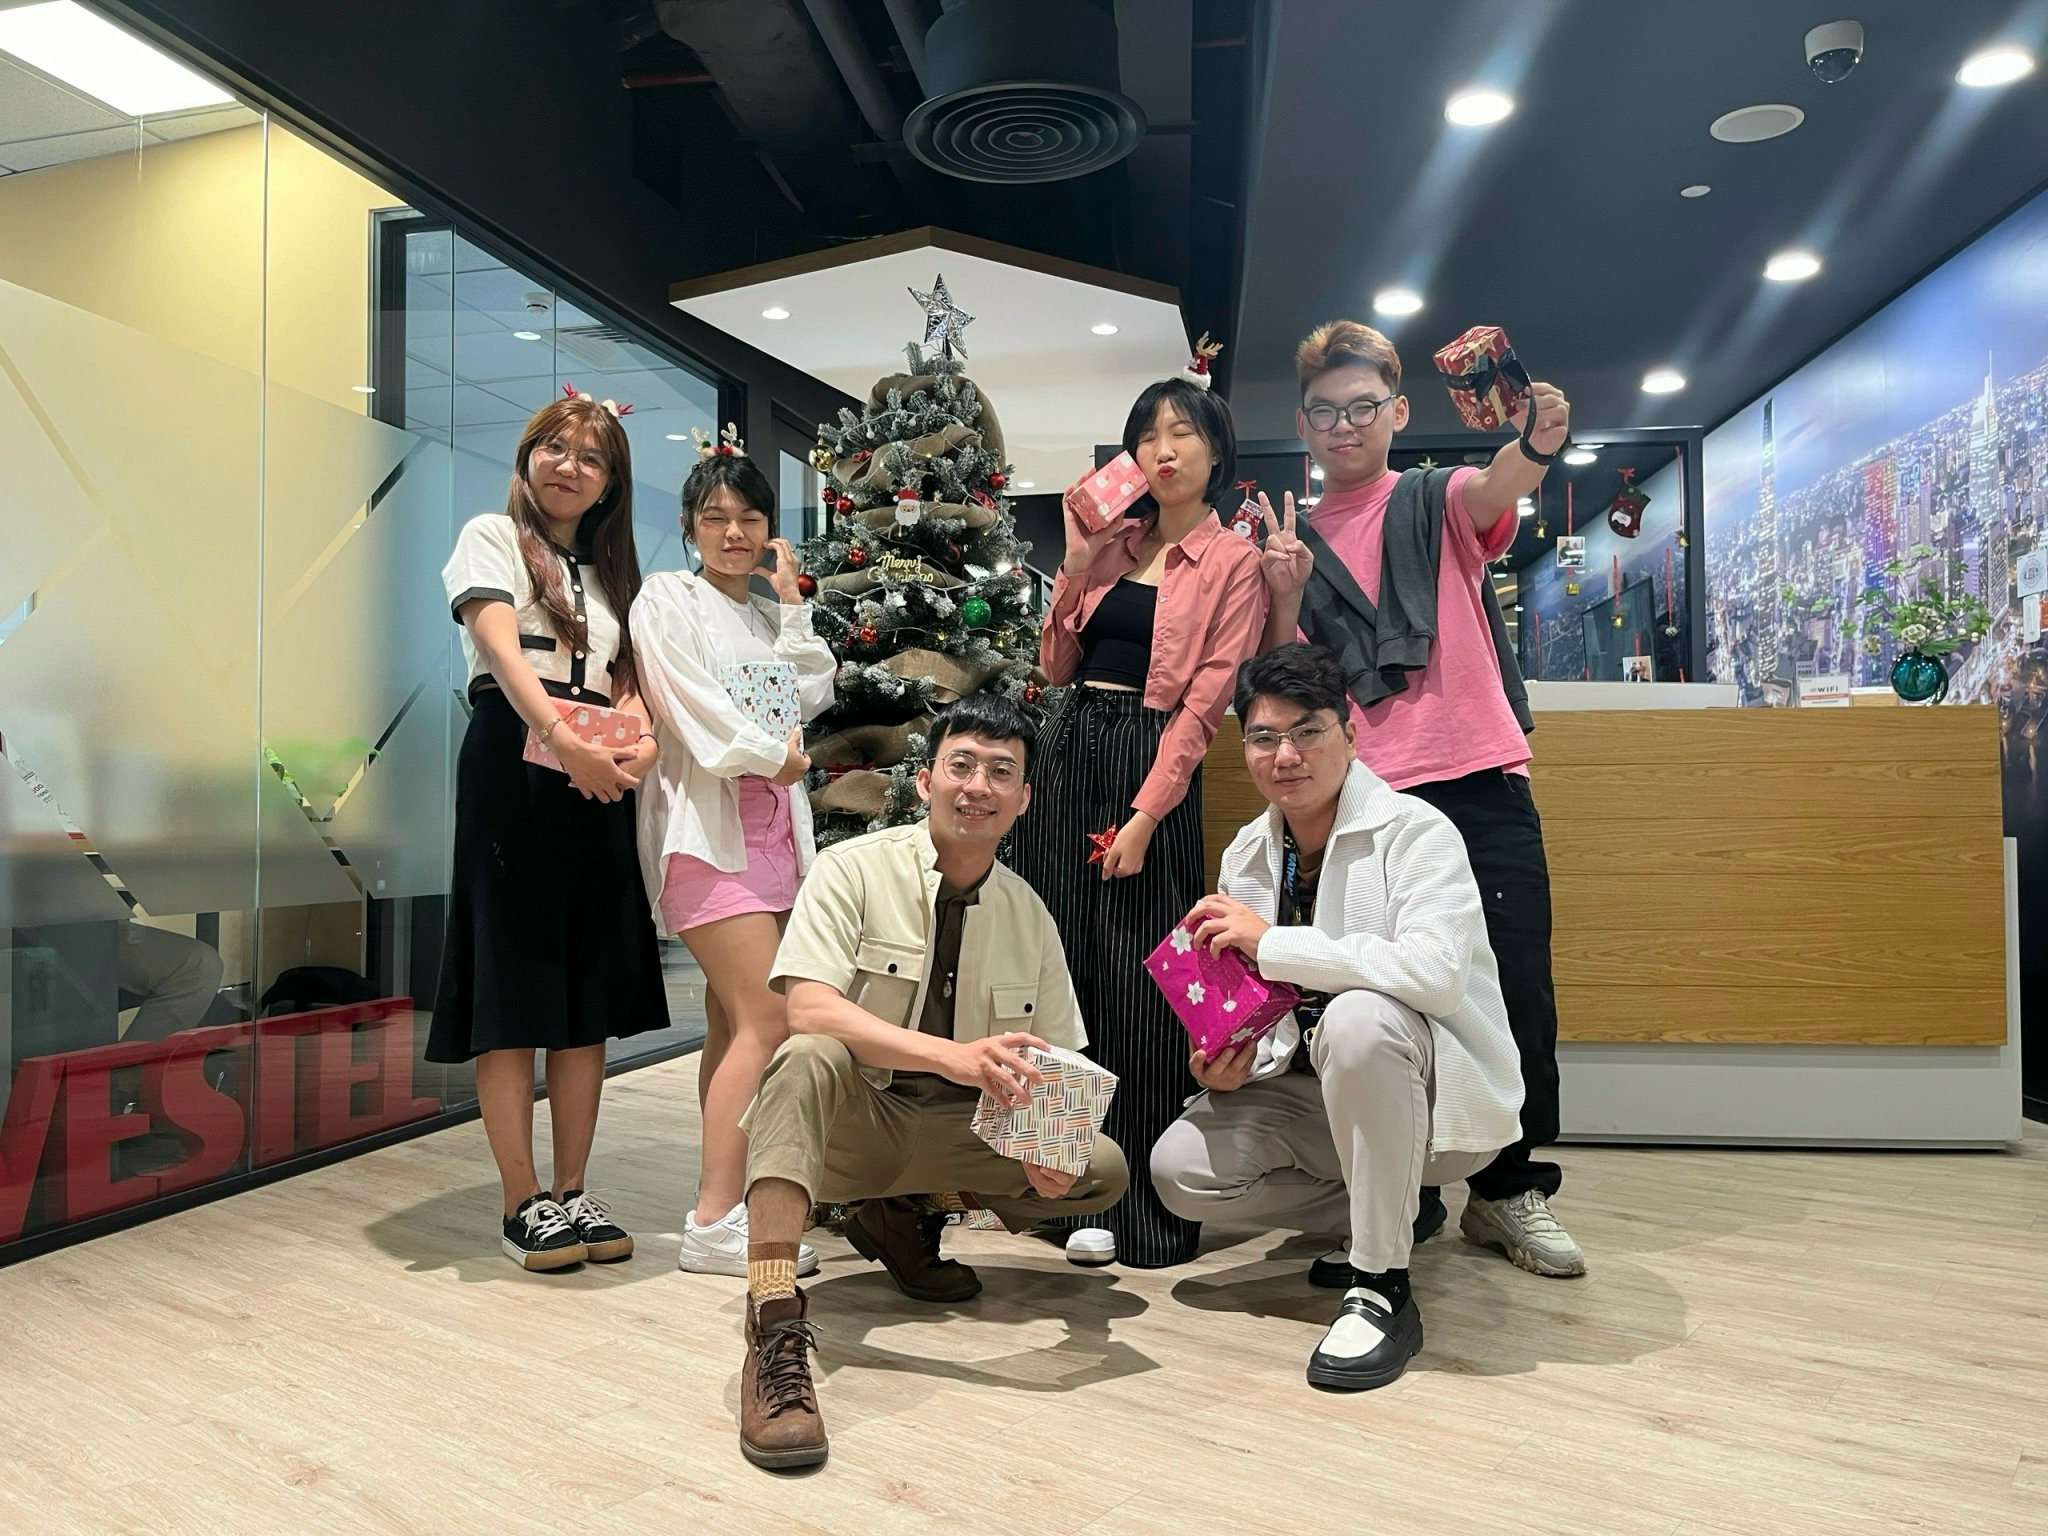 Christmas-wit-AsiaPac-x-AdTech-Team-09.png